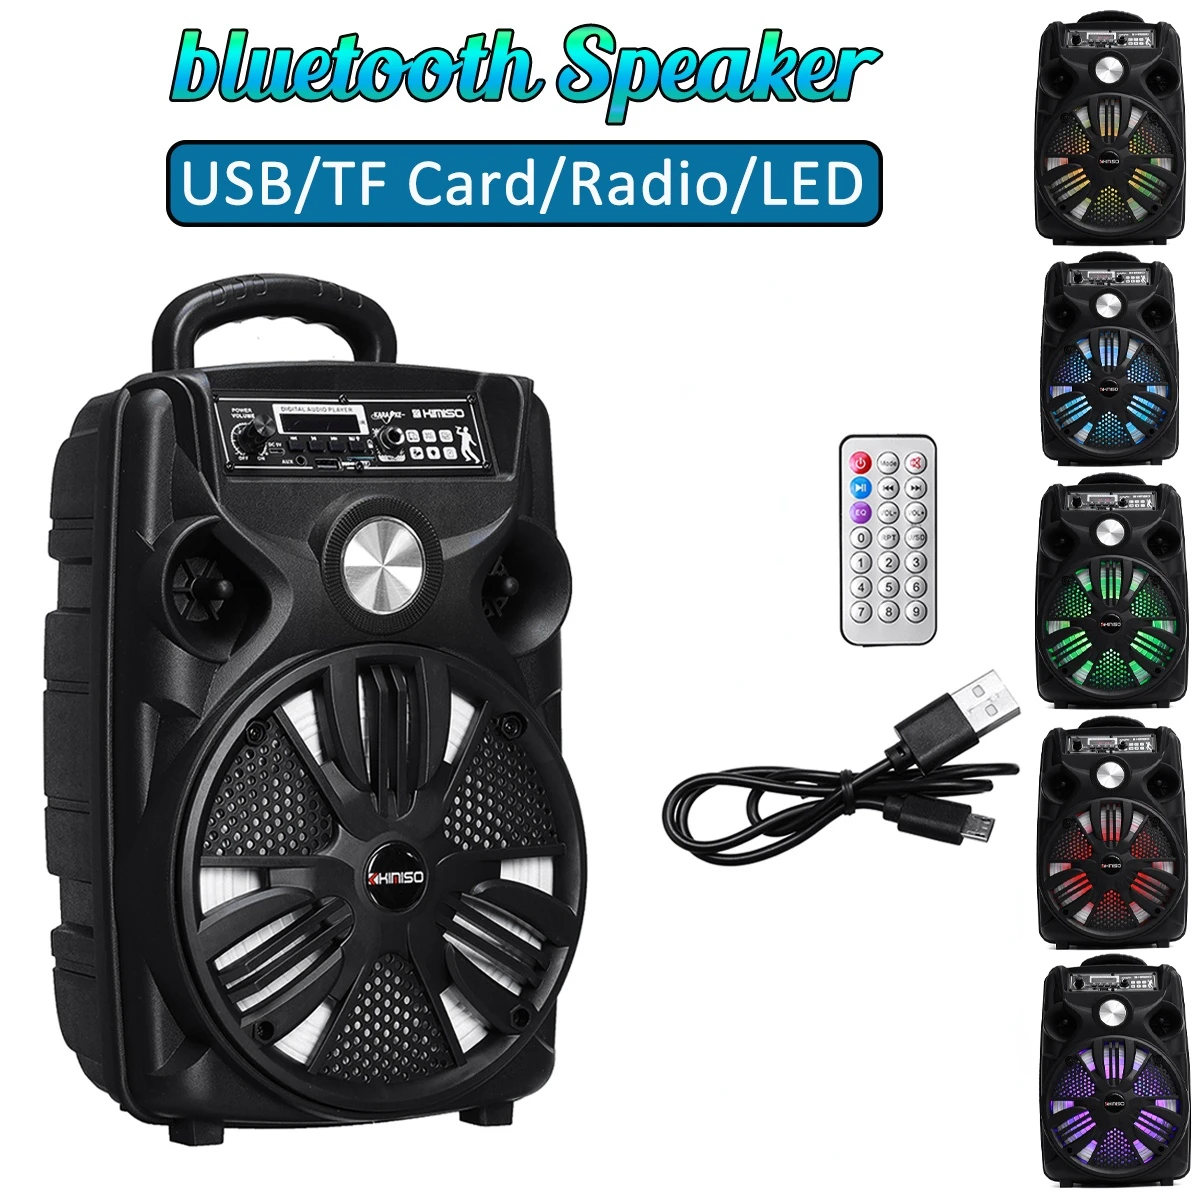 8 Inch LED Display Portable Bluetooth 5.0 Wireless Speaker Loud Outdoor With TF Card USB Radio